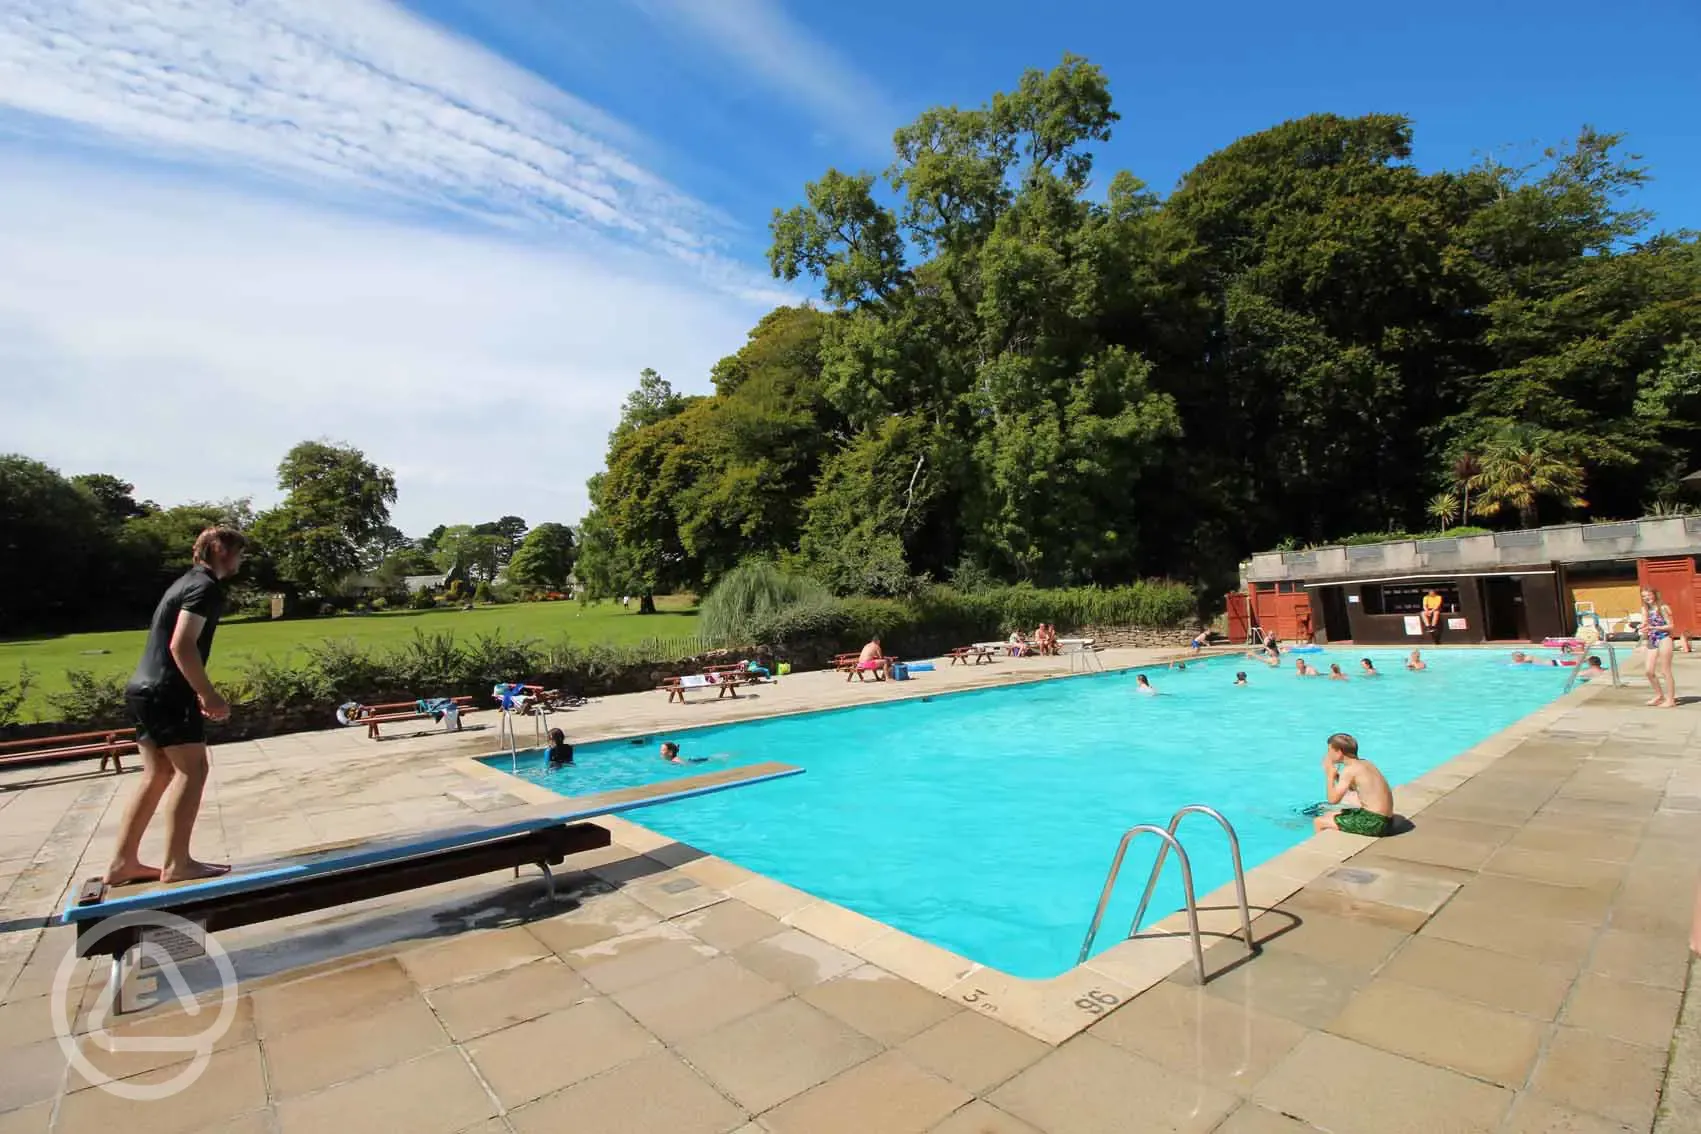 Outdoor heated 25m swimming pool